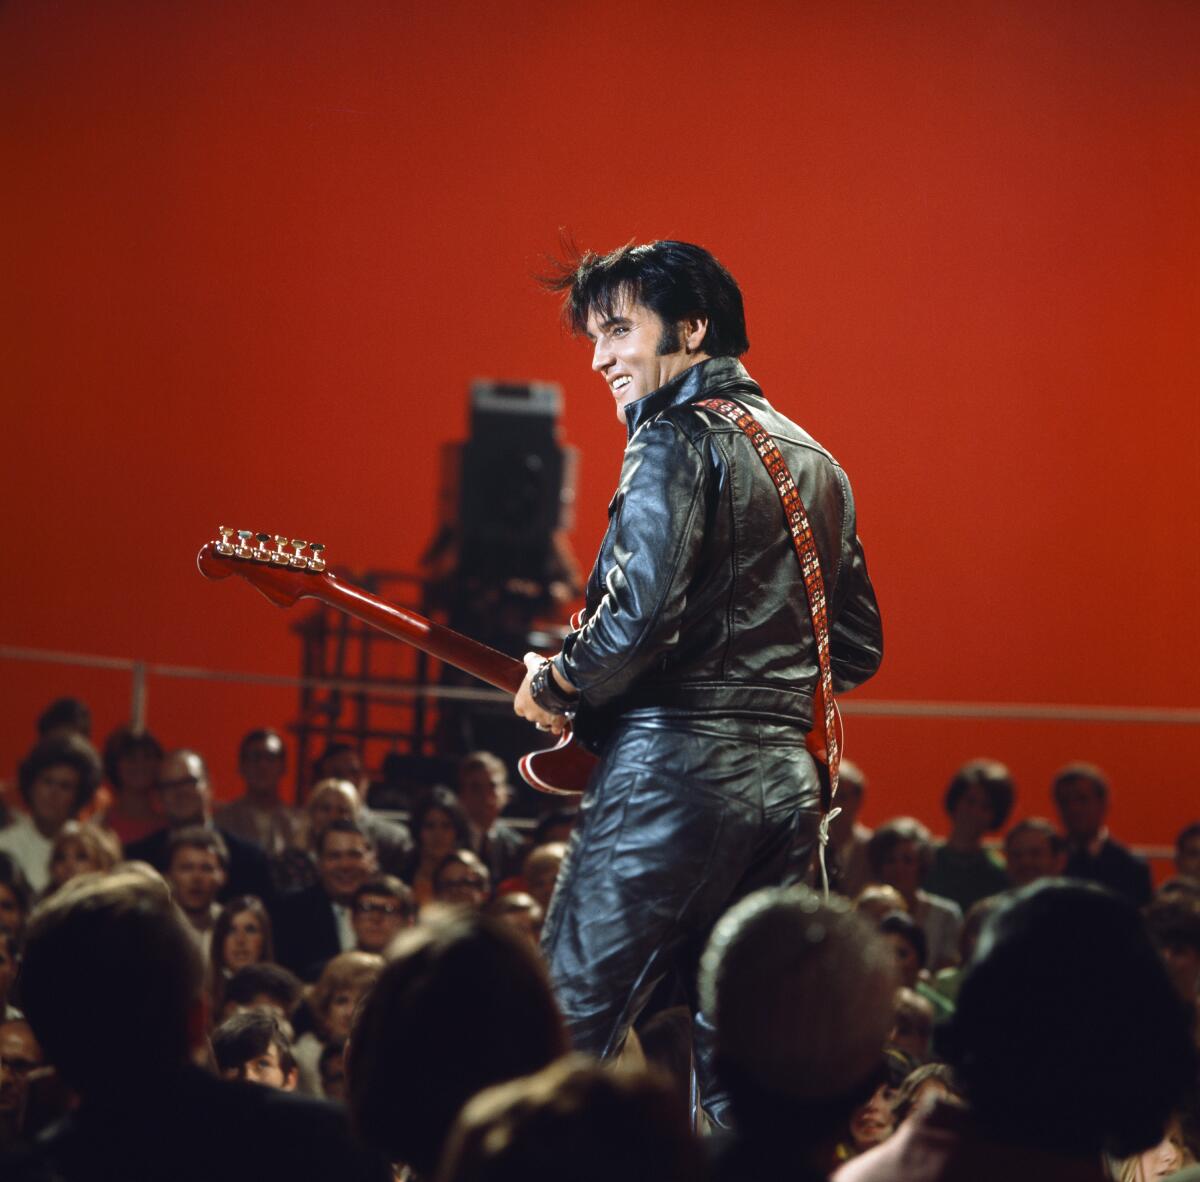 Elvis Presley from behind, surrounded by an audience. He is in a black leather suit and is holding a guitar.